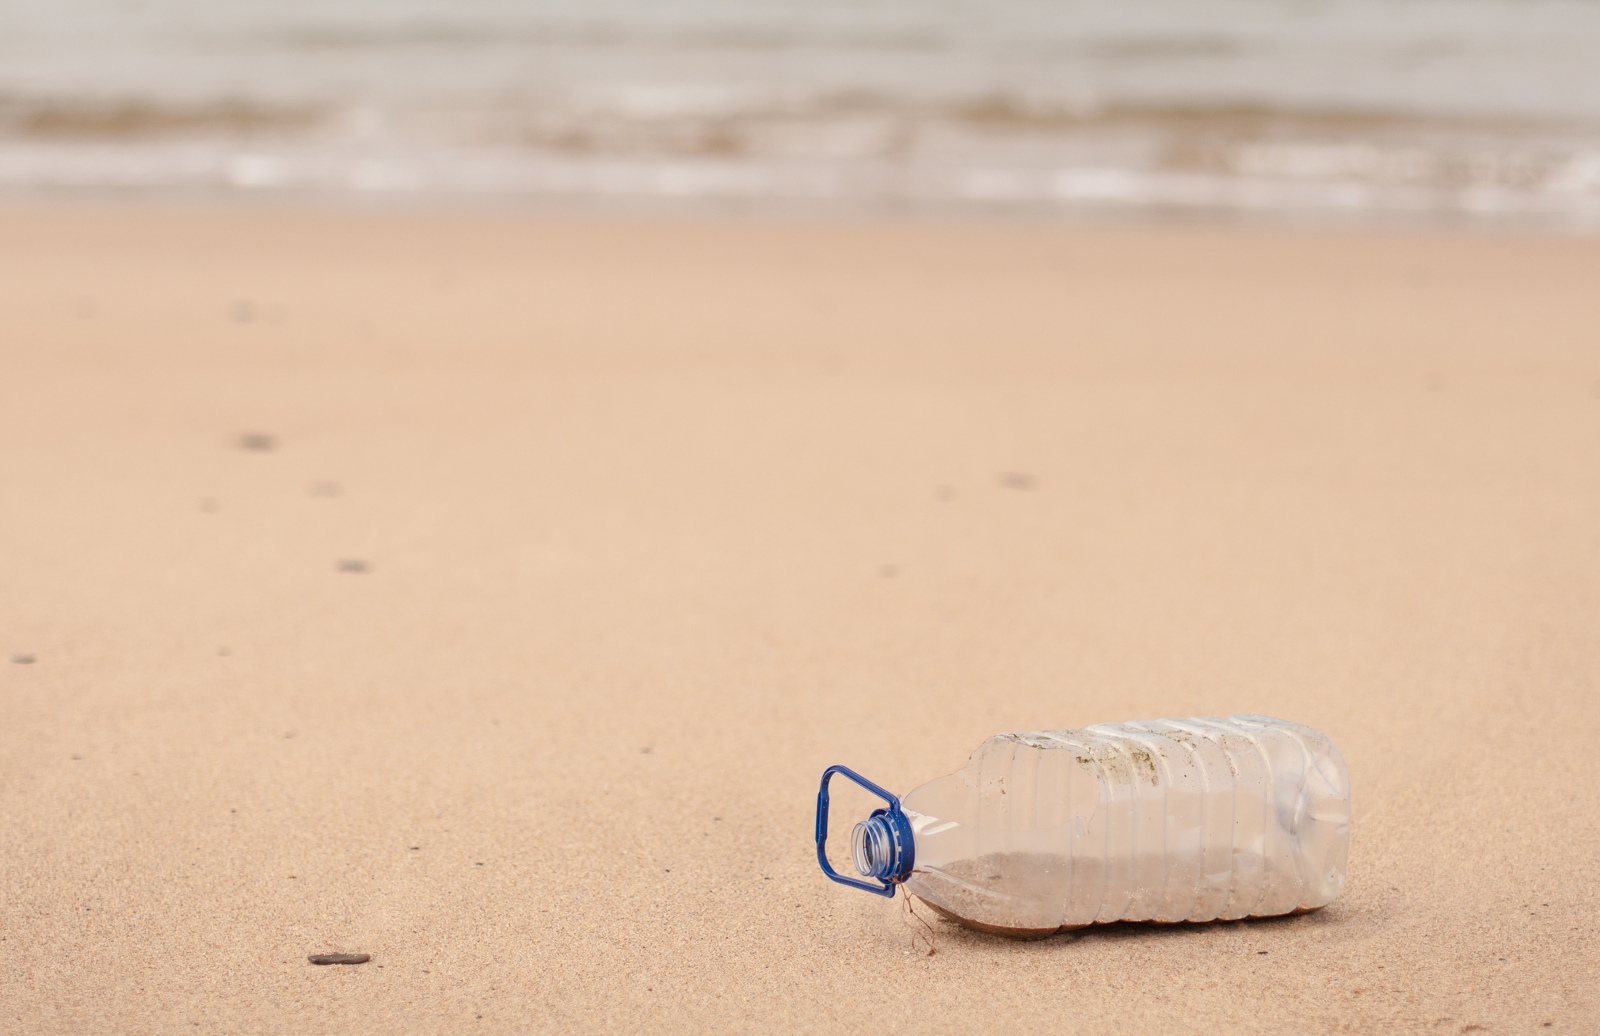 5 Countries Might Be Responsible for the Majority of Ocean Pollution, But Here’s Why We’re Not Off the Hook!5 Countries Might Be Responsible for the Majority of Ocean Pollution, But Here’s Why We’re Not Off the Hook!